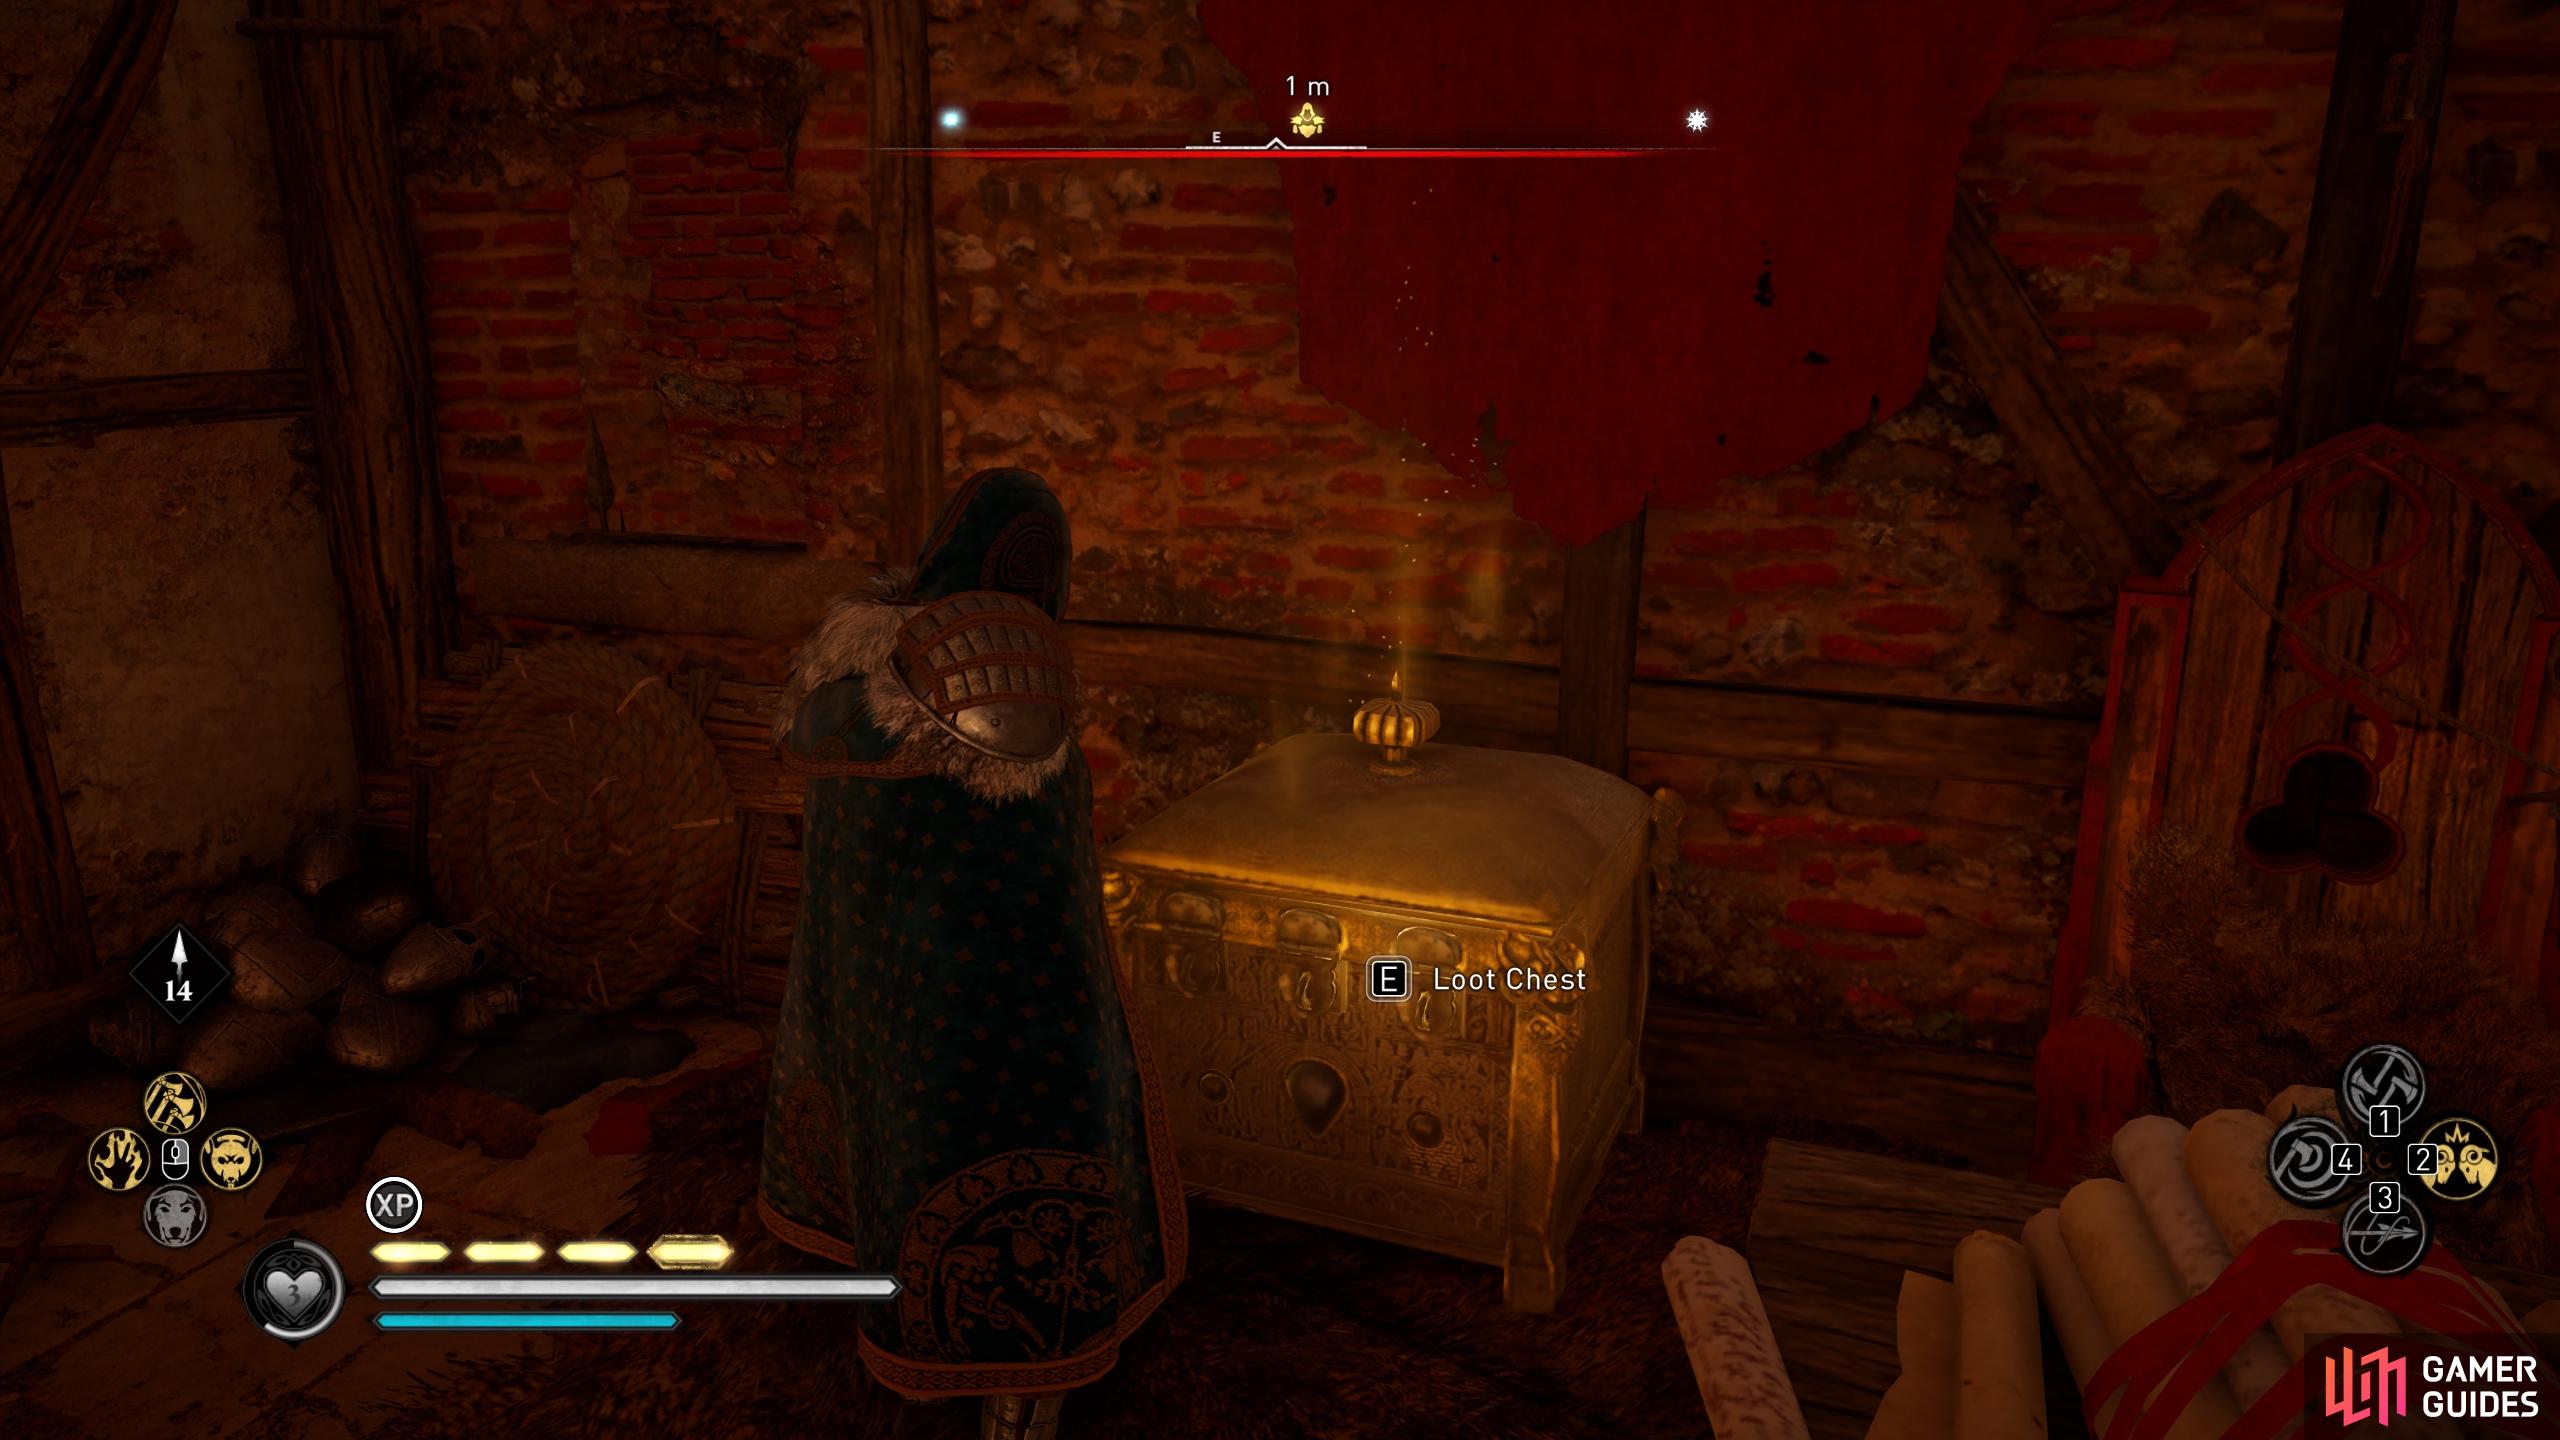 You can sneak into the house and loot the wealth chest without alerting any of the guards.